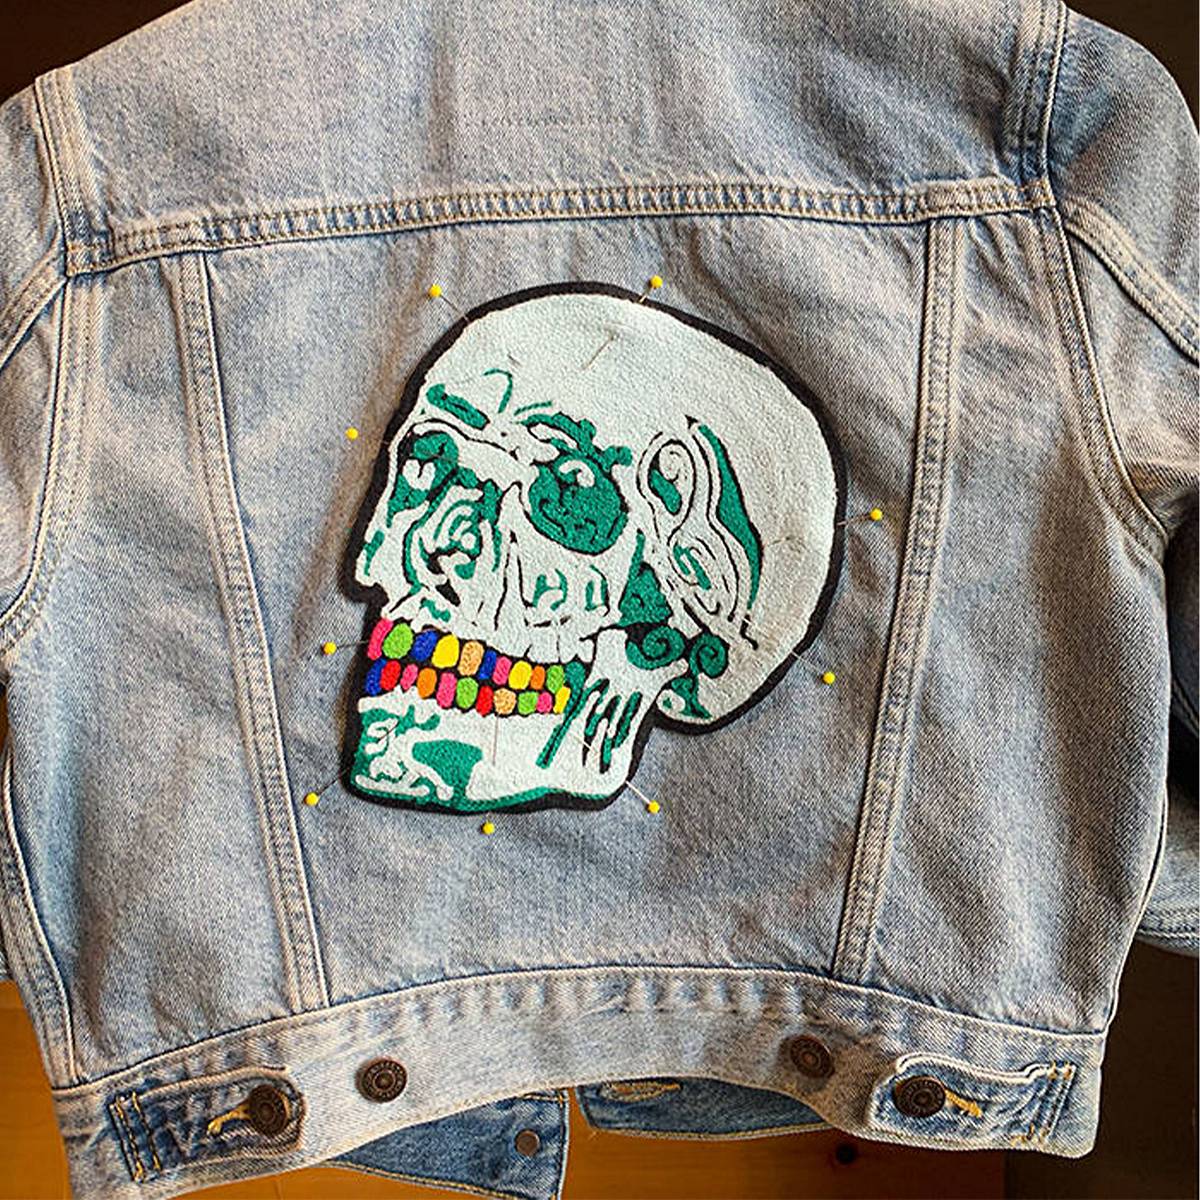 Intricate teal and seafoam green chain stitch skull embroidery on a Trucker